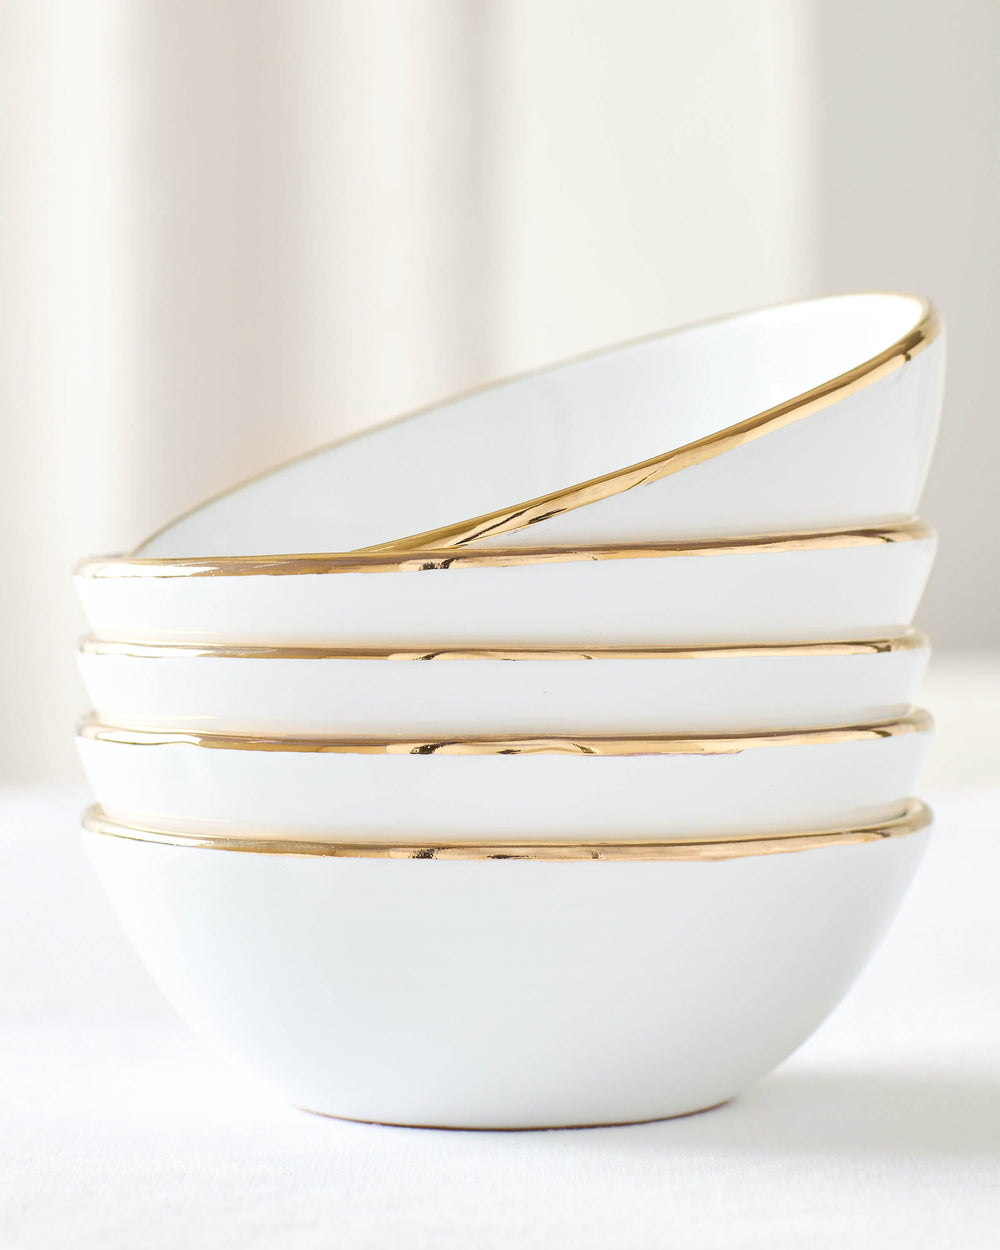 White ceramic soup bowls with 18k gold-rimmed edge stacked against white background. Fez Dinnerware by Fairkind.